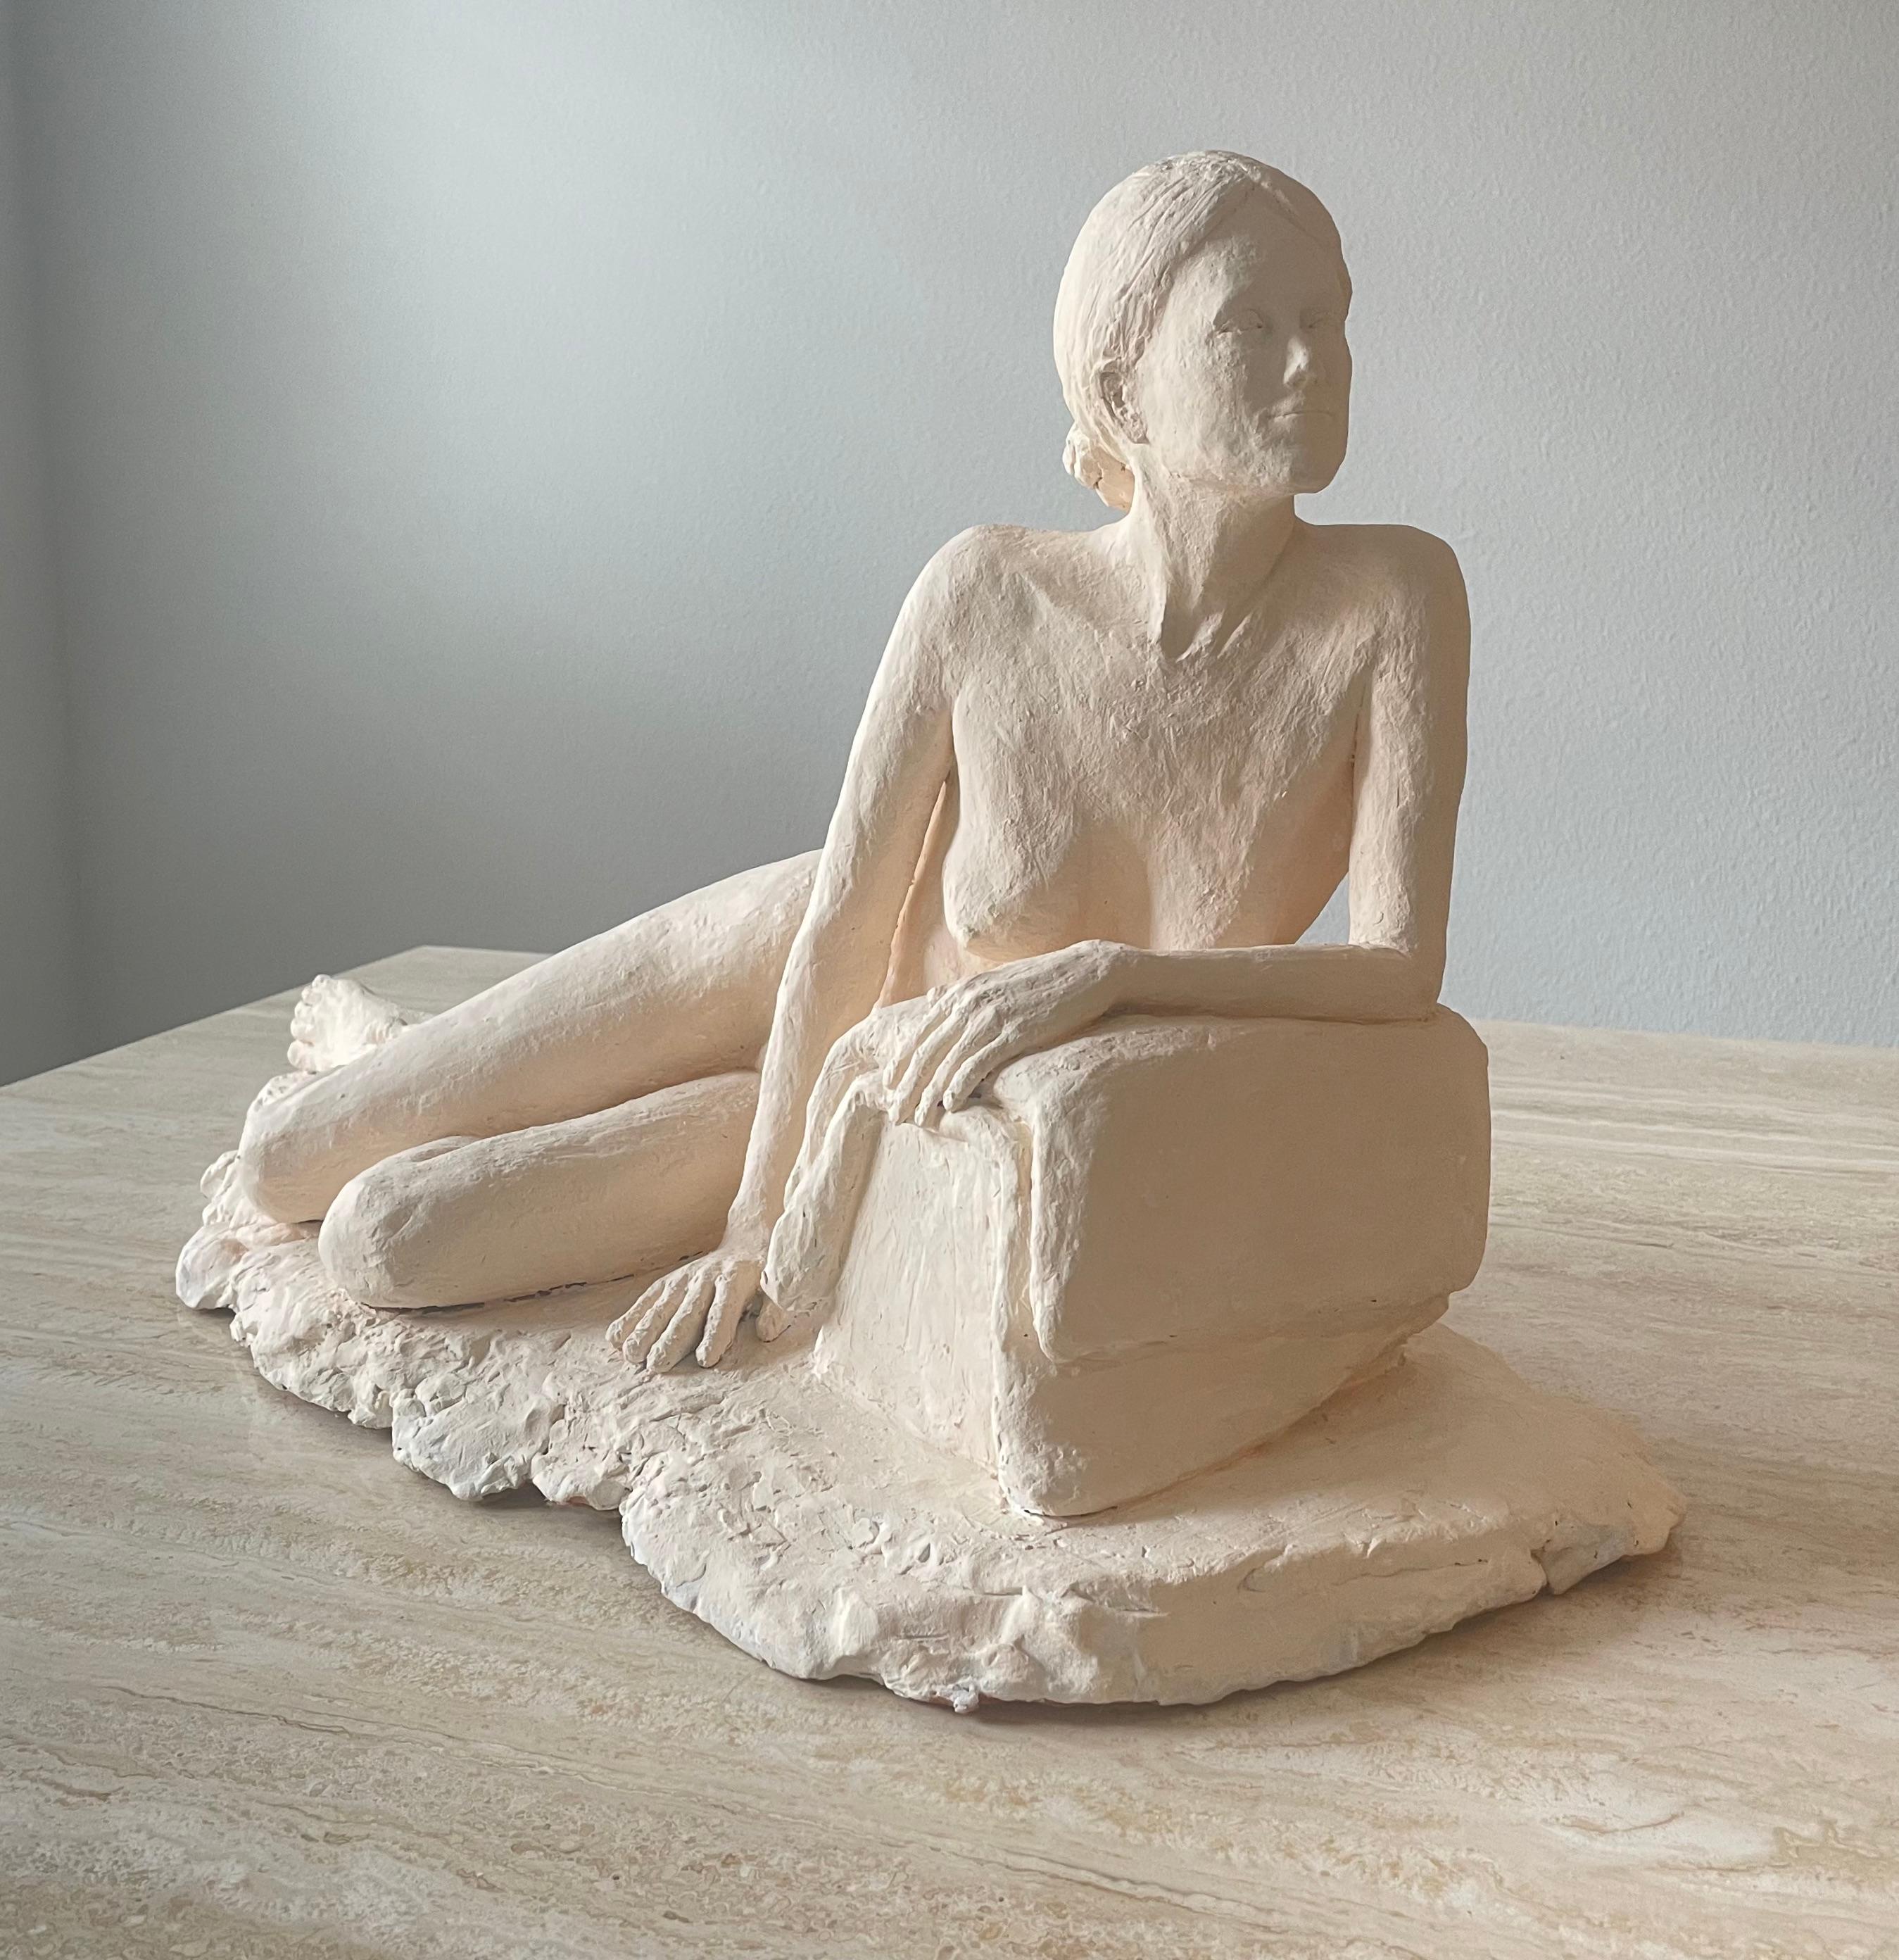 Nude woman plaster sculpture. Signed by the artist 